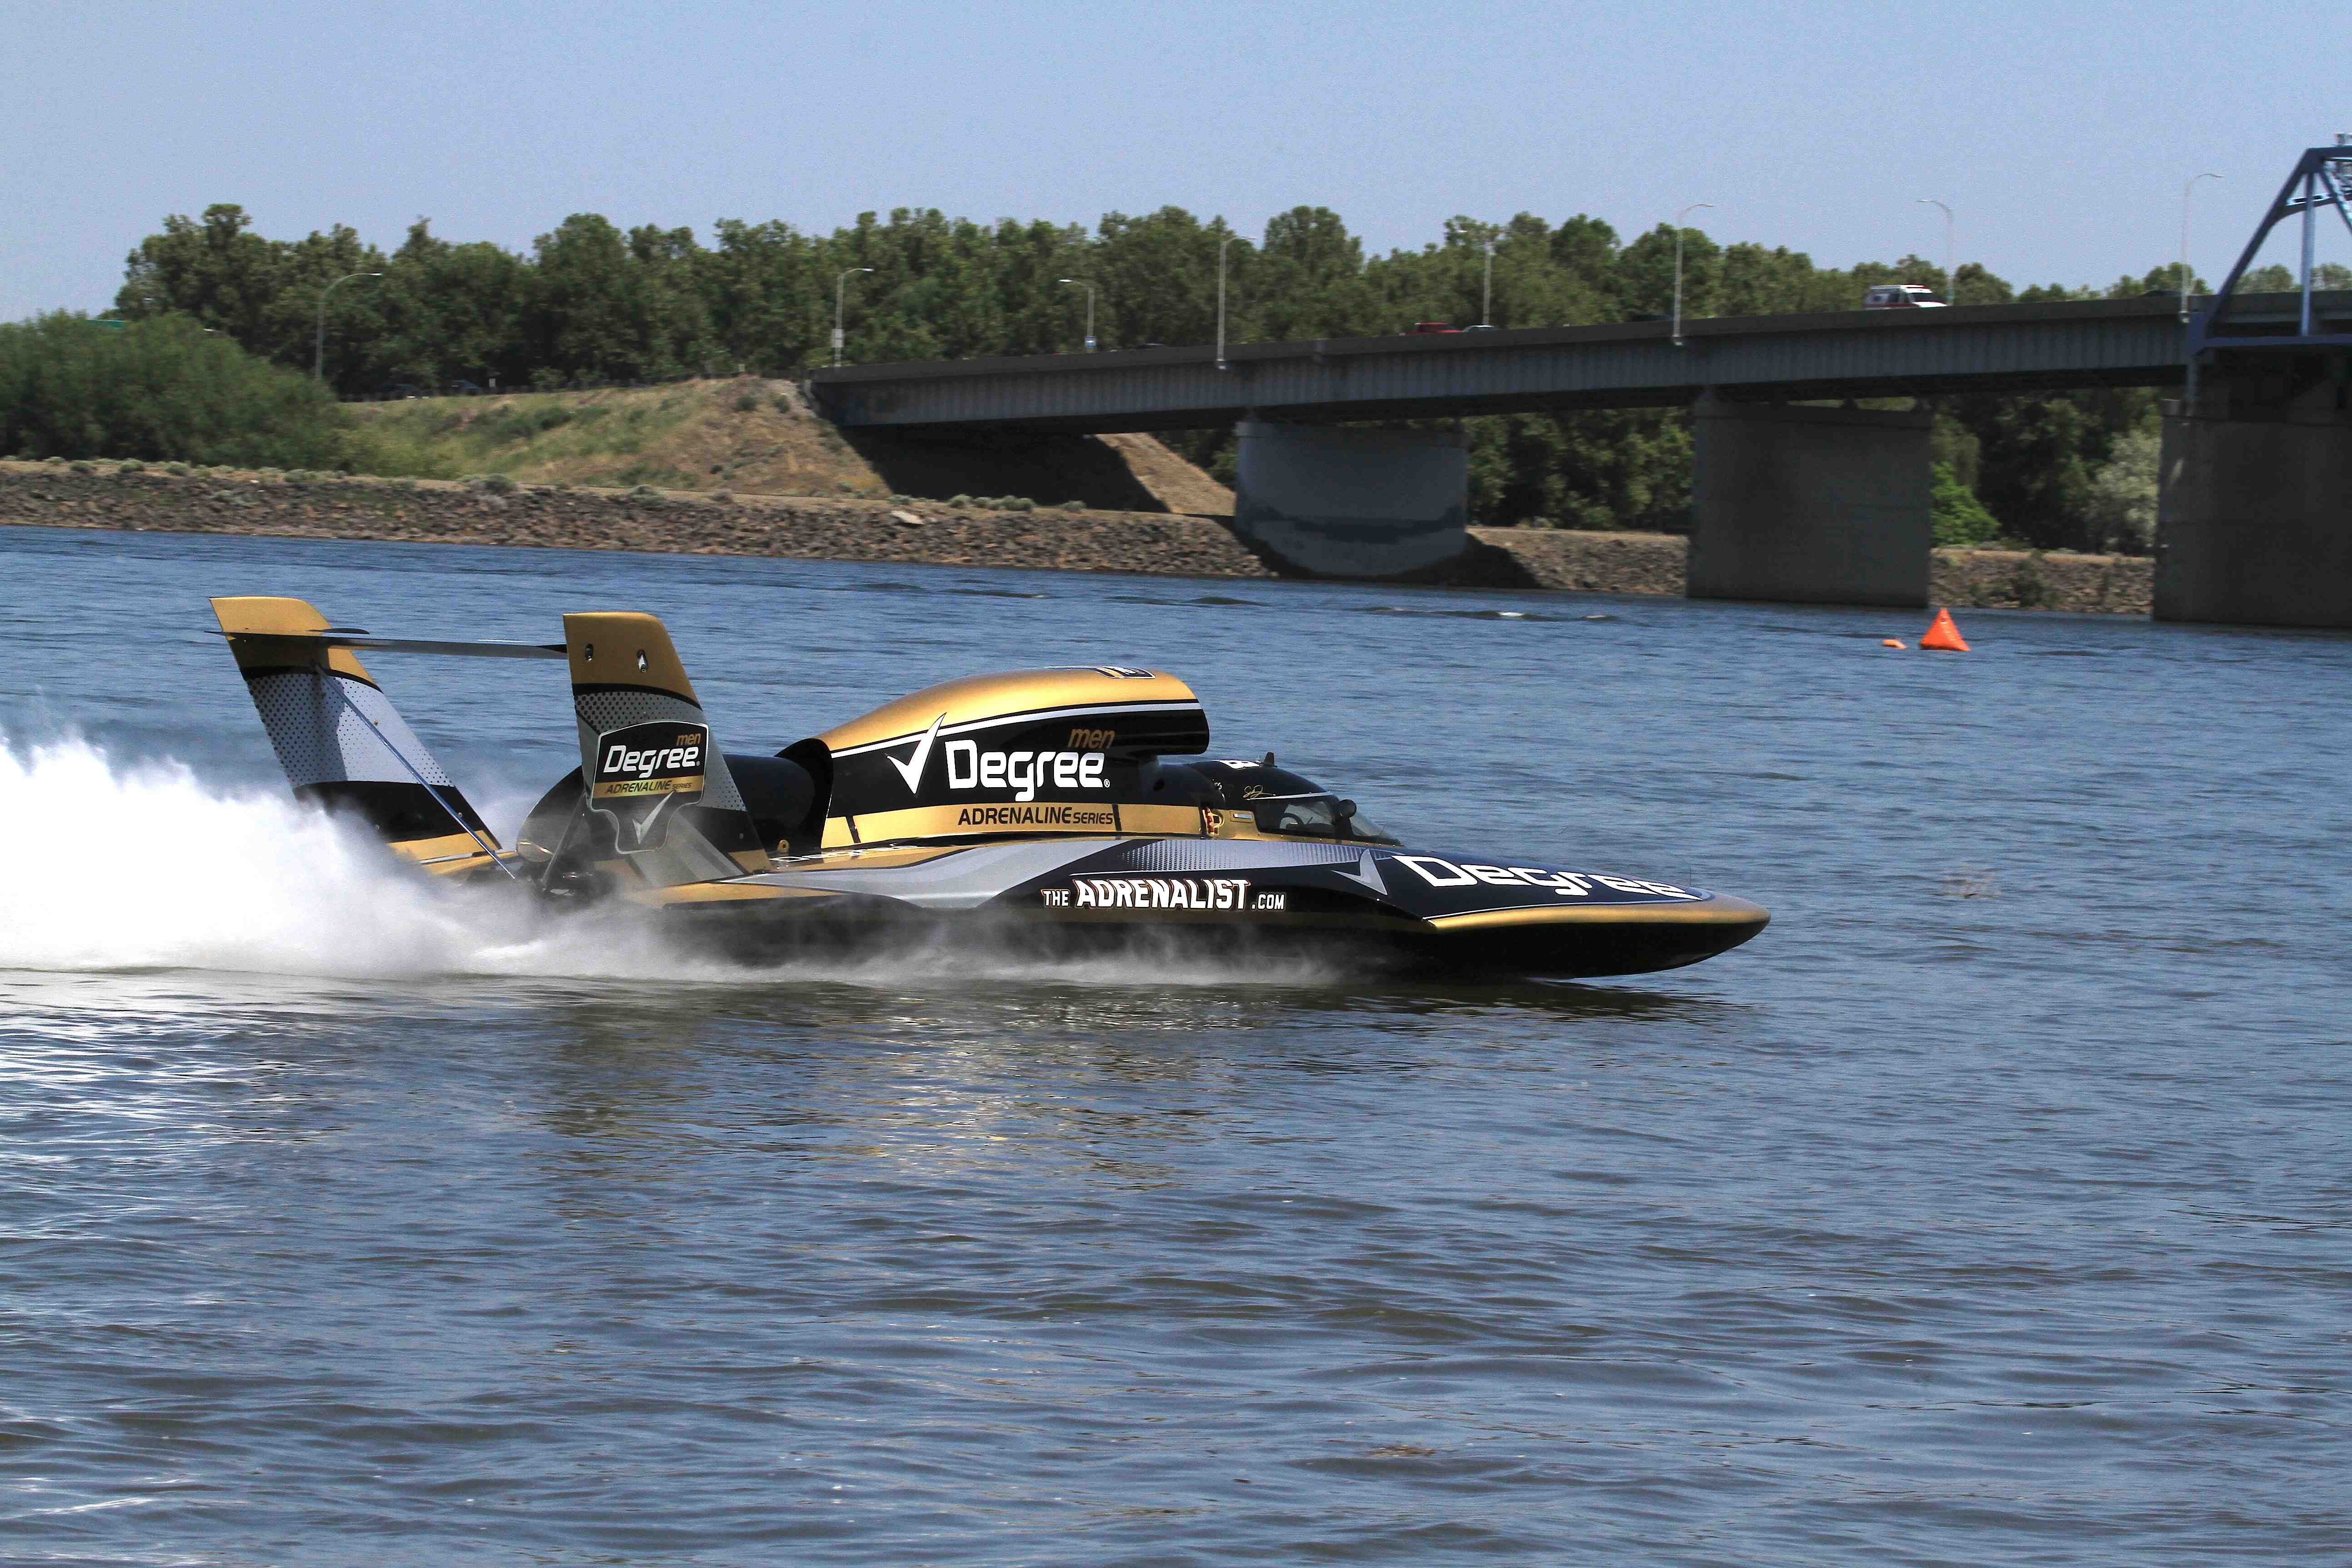 unlimited hydroplane, Race, Racing, Jet, Hydroplane, Boat, Ship, Hot